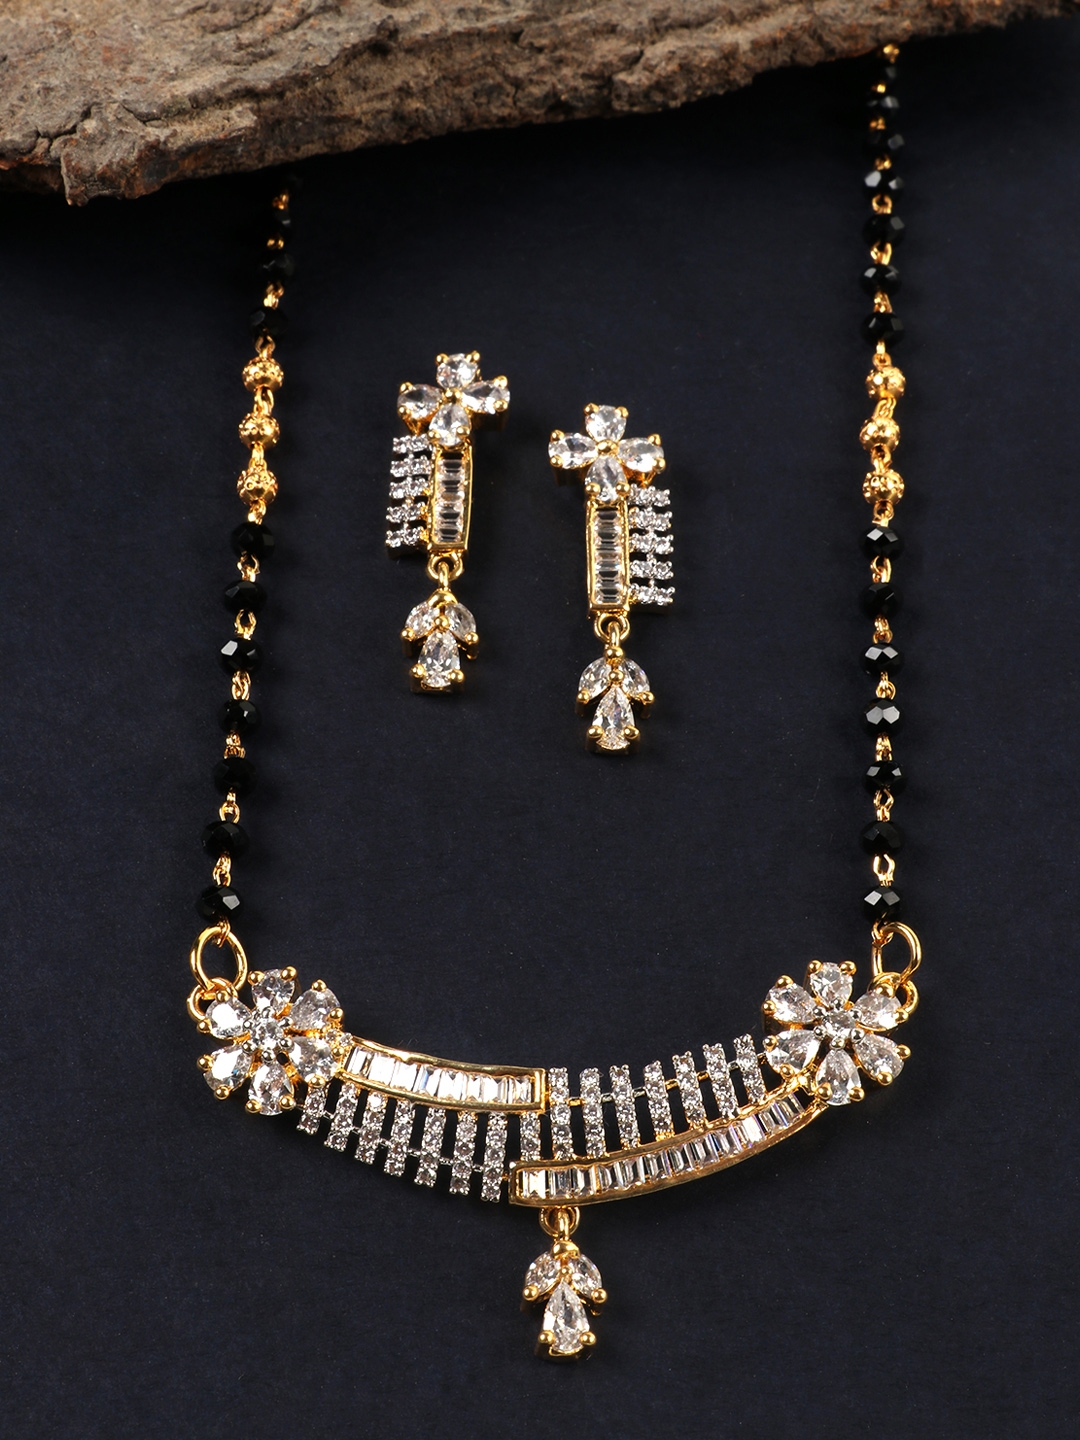 JEWELS GEHNA Black Gold Plated AD Studded Mangalsutra   Earrings Set